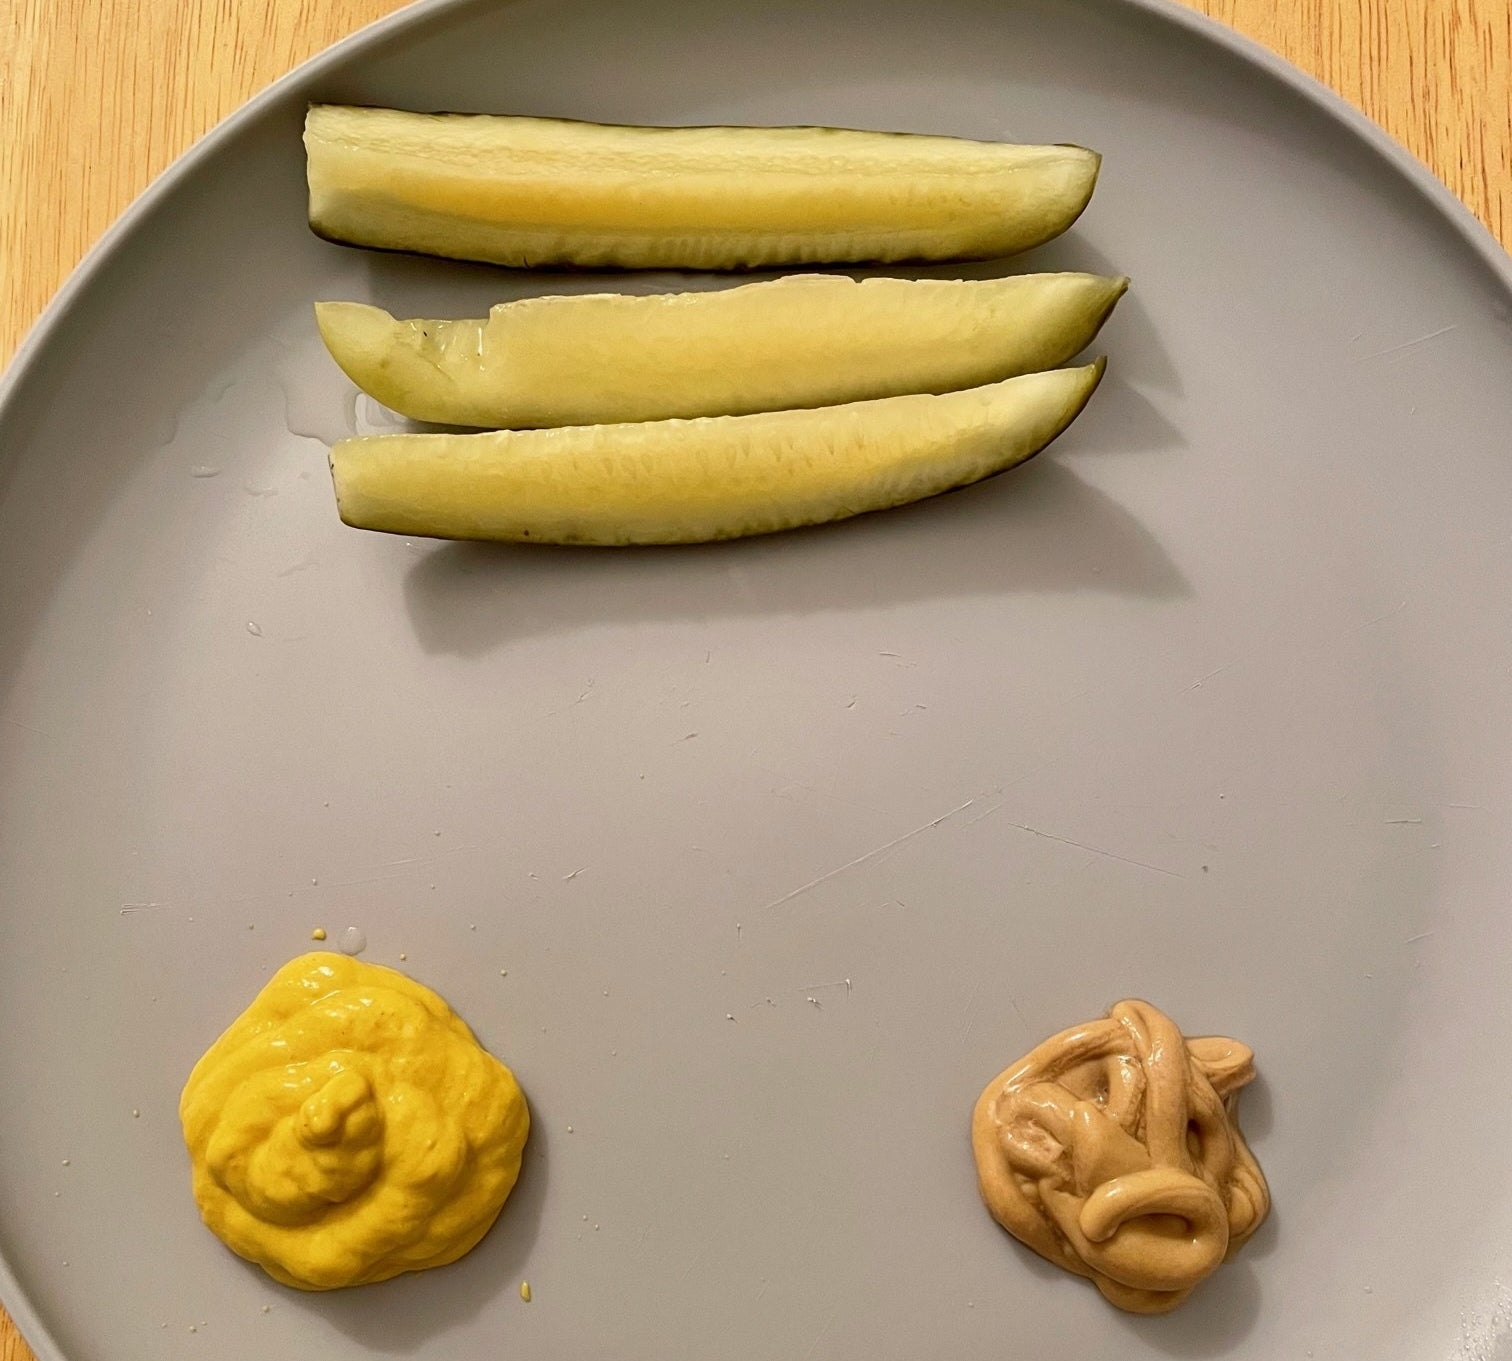 Pickles and mustard